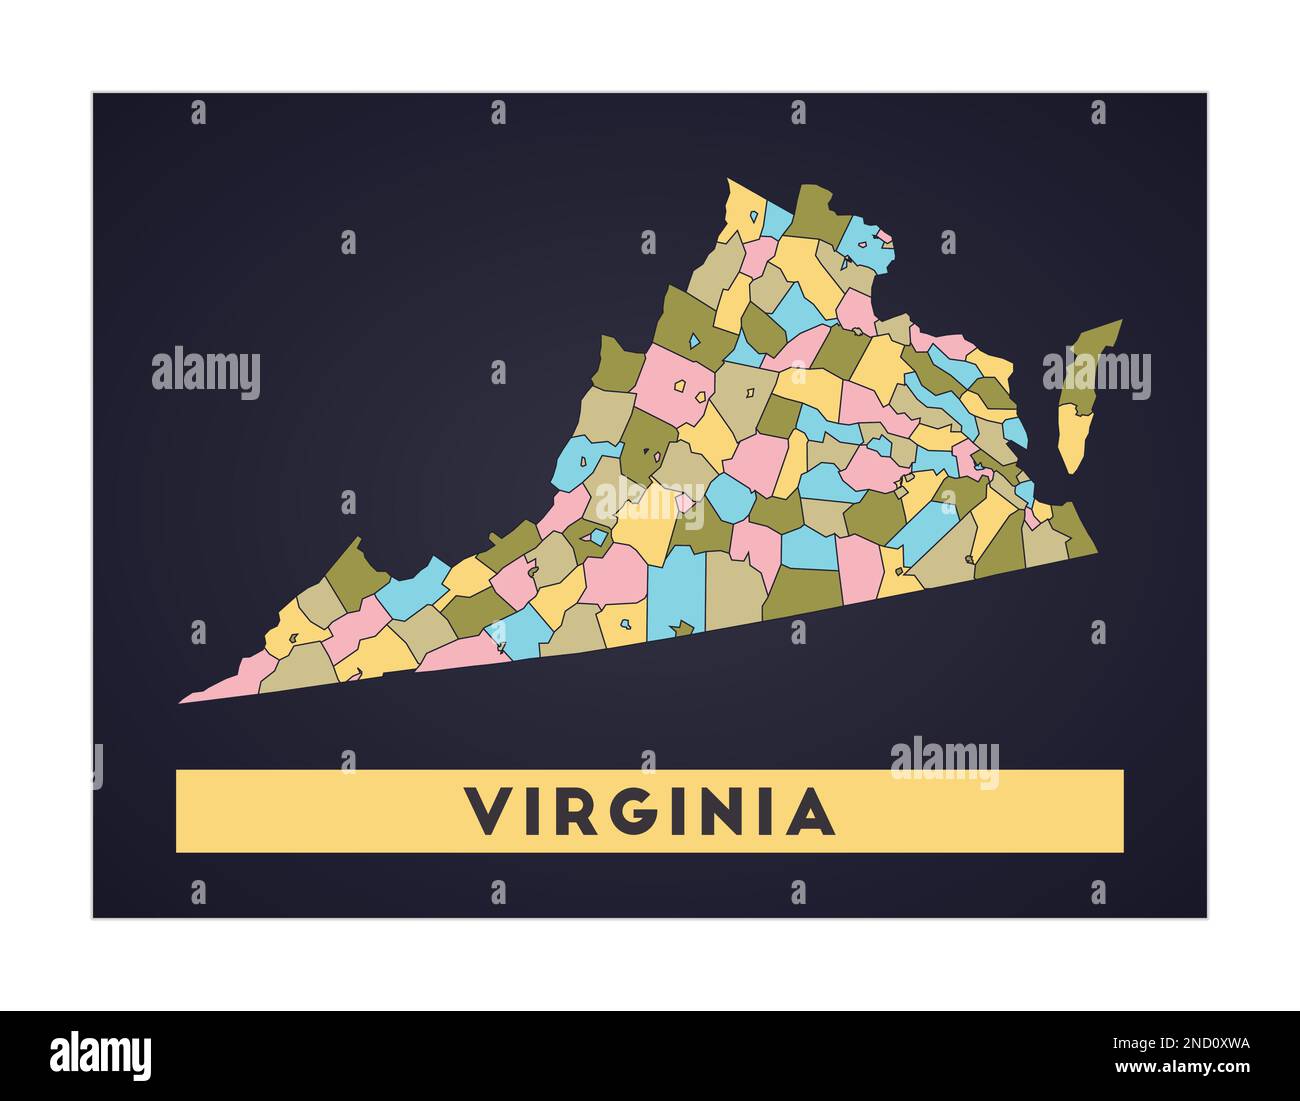 Virginia map. Us state poster with regions. Shape of Virginia with us state name. Appealing vector illustration. Stock Vector